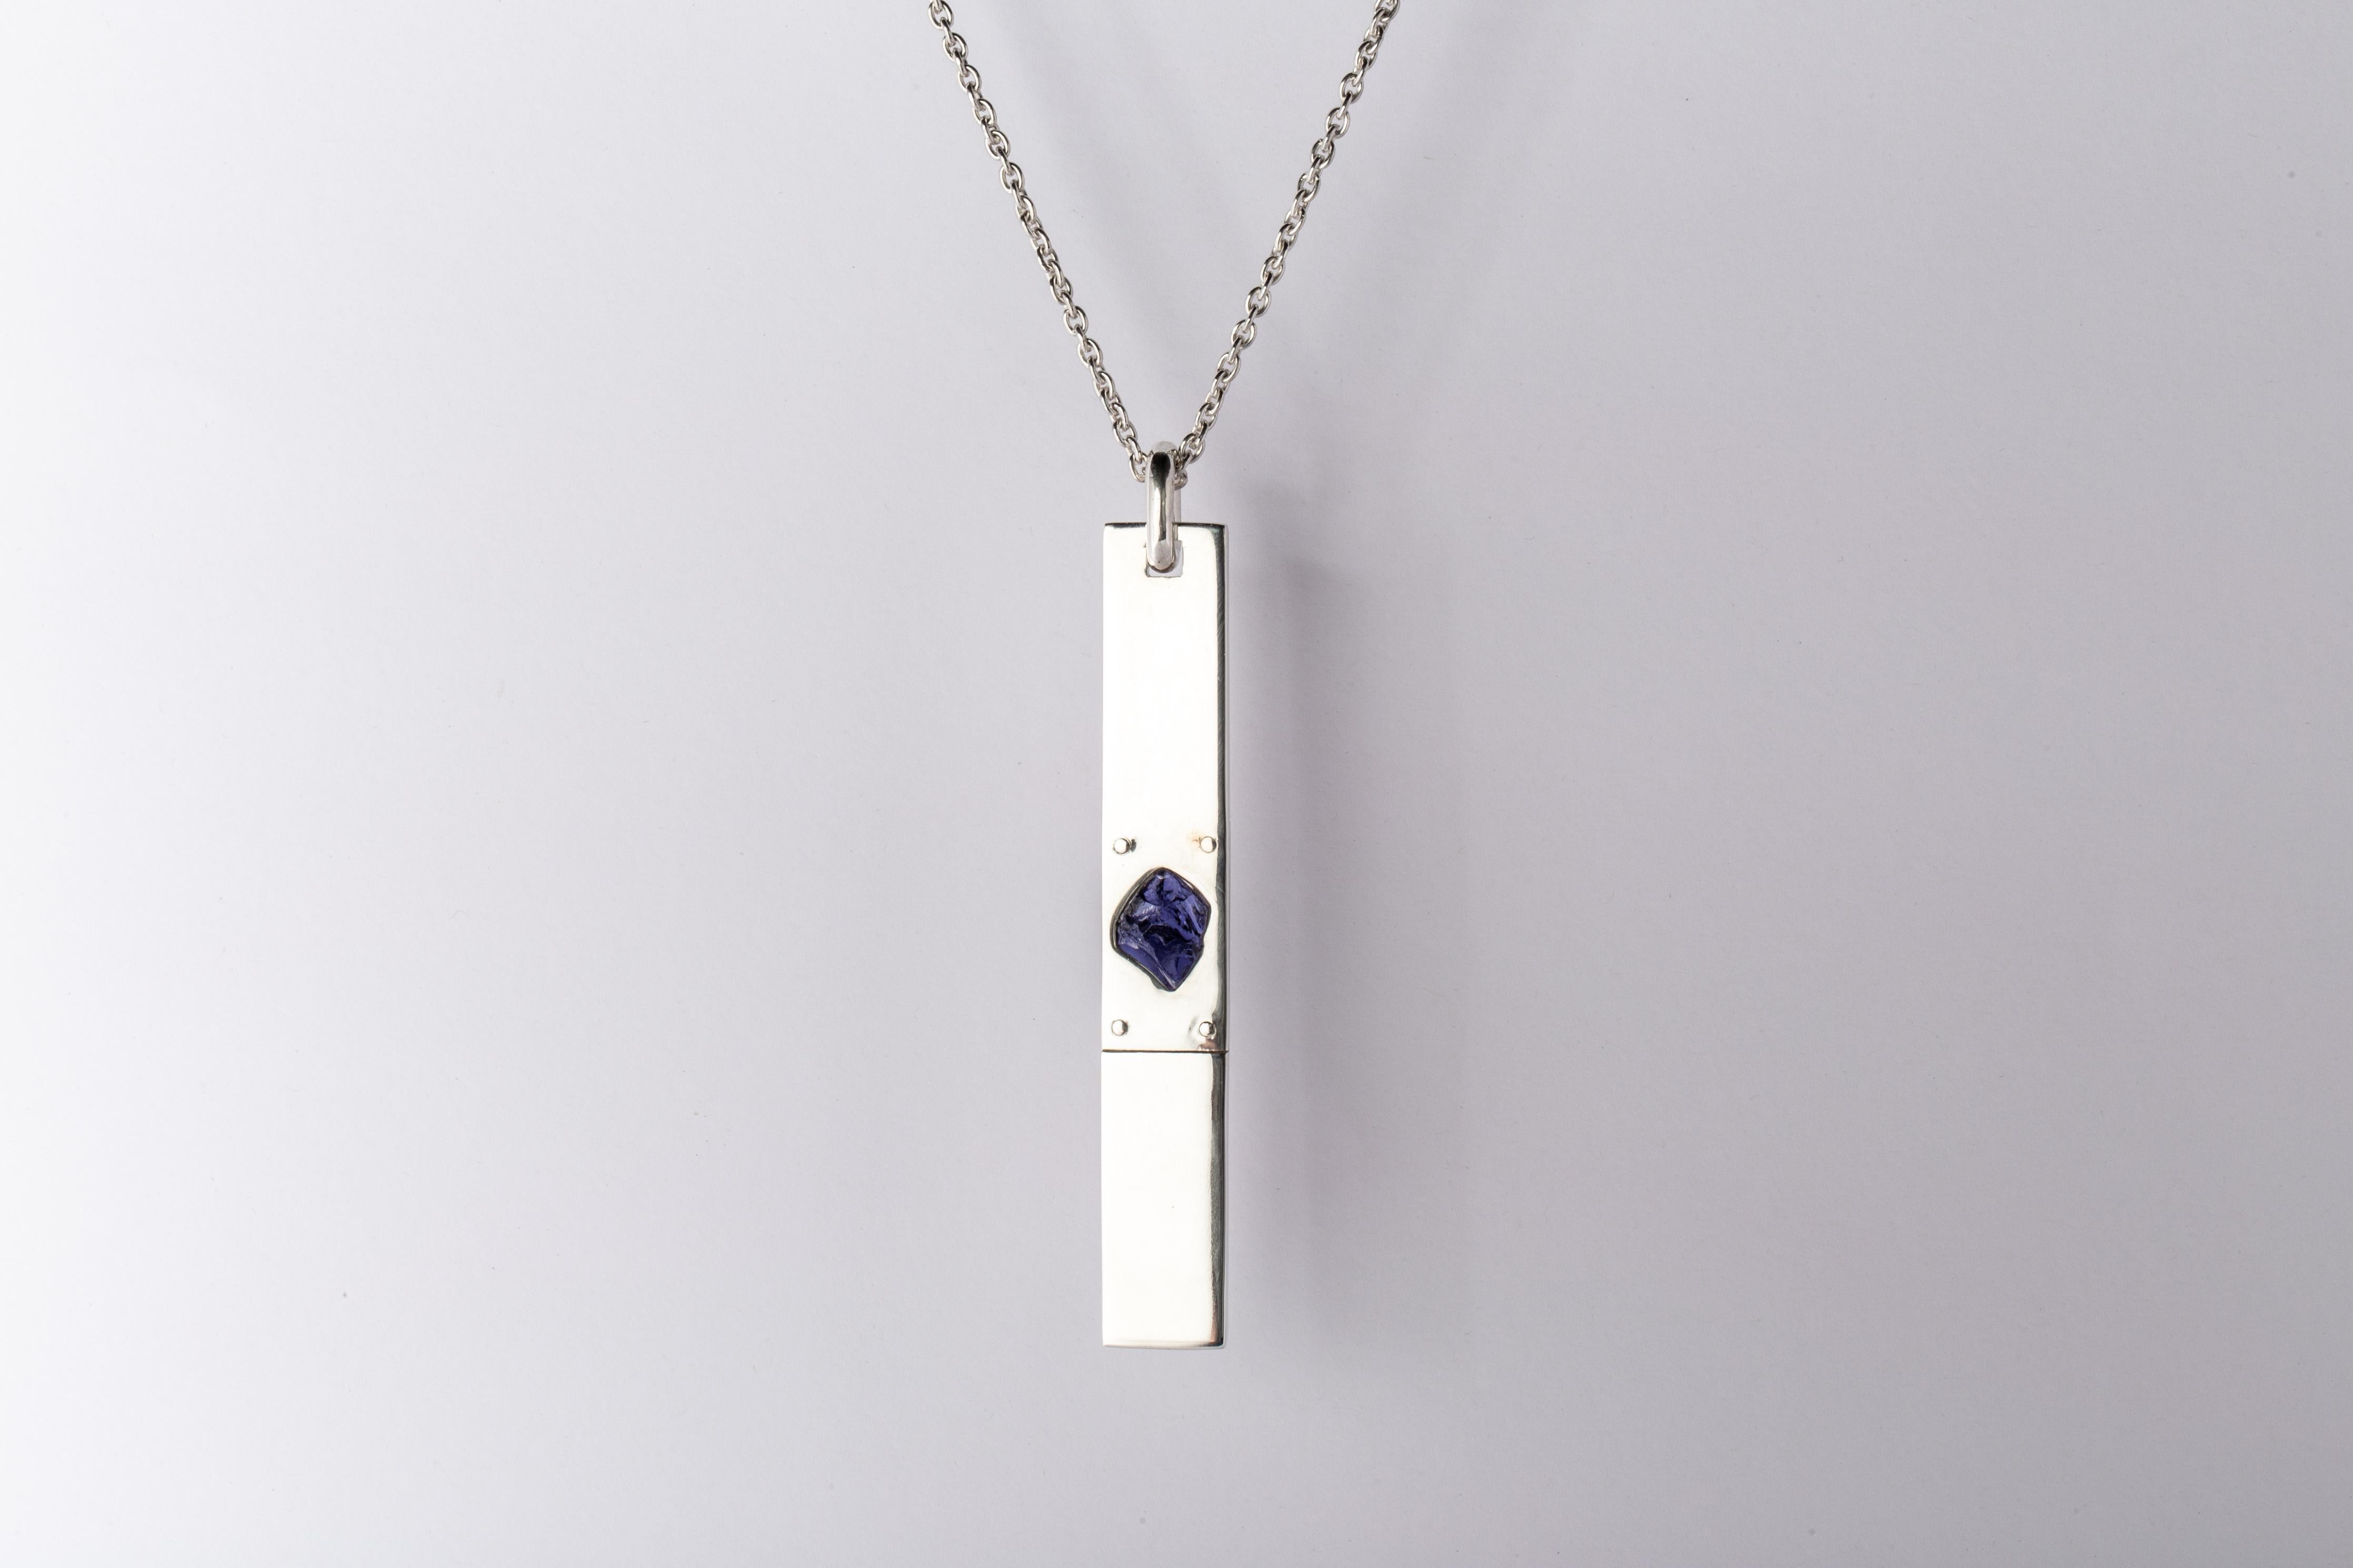 Pendant necklace in polished sterling silver and a slab of rough iolite in purple color. The Amulet series seeks to encapsulate the energy of a mineral element(s). This family is a branch from the Talisman family and seeks to further explore the